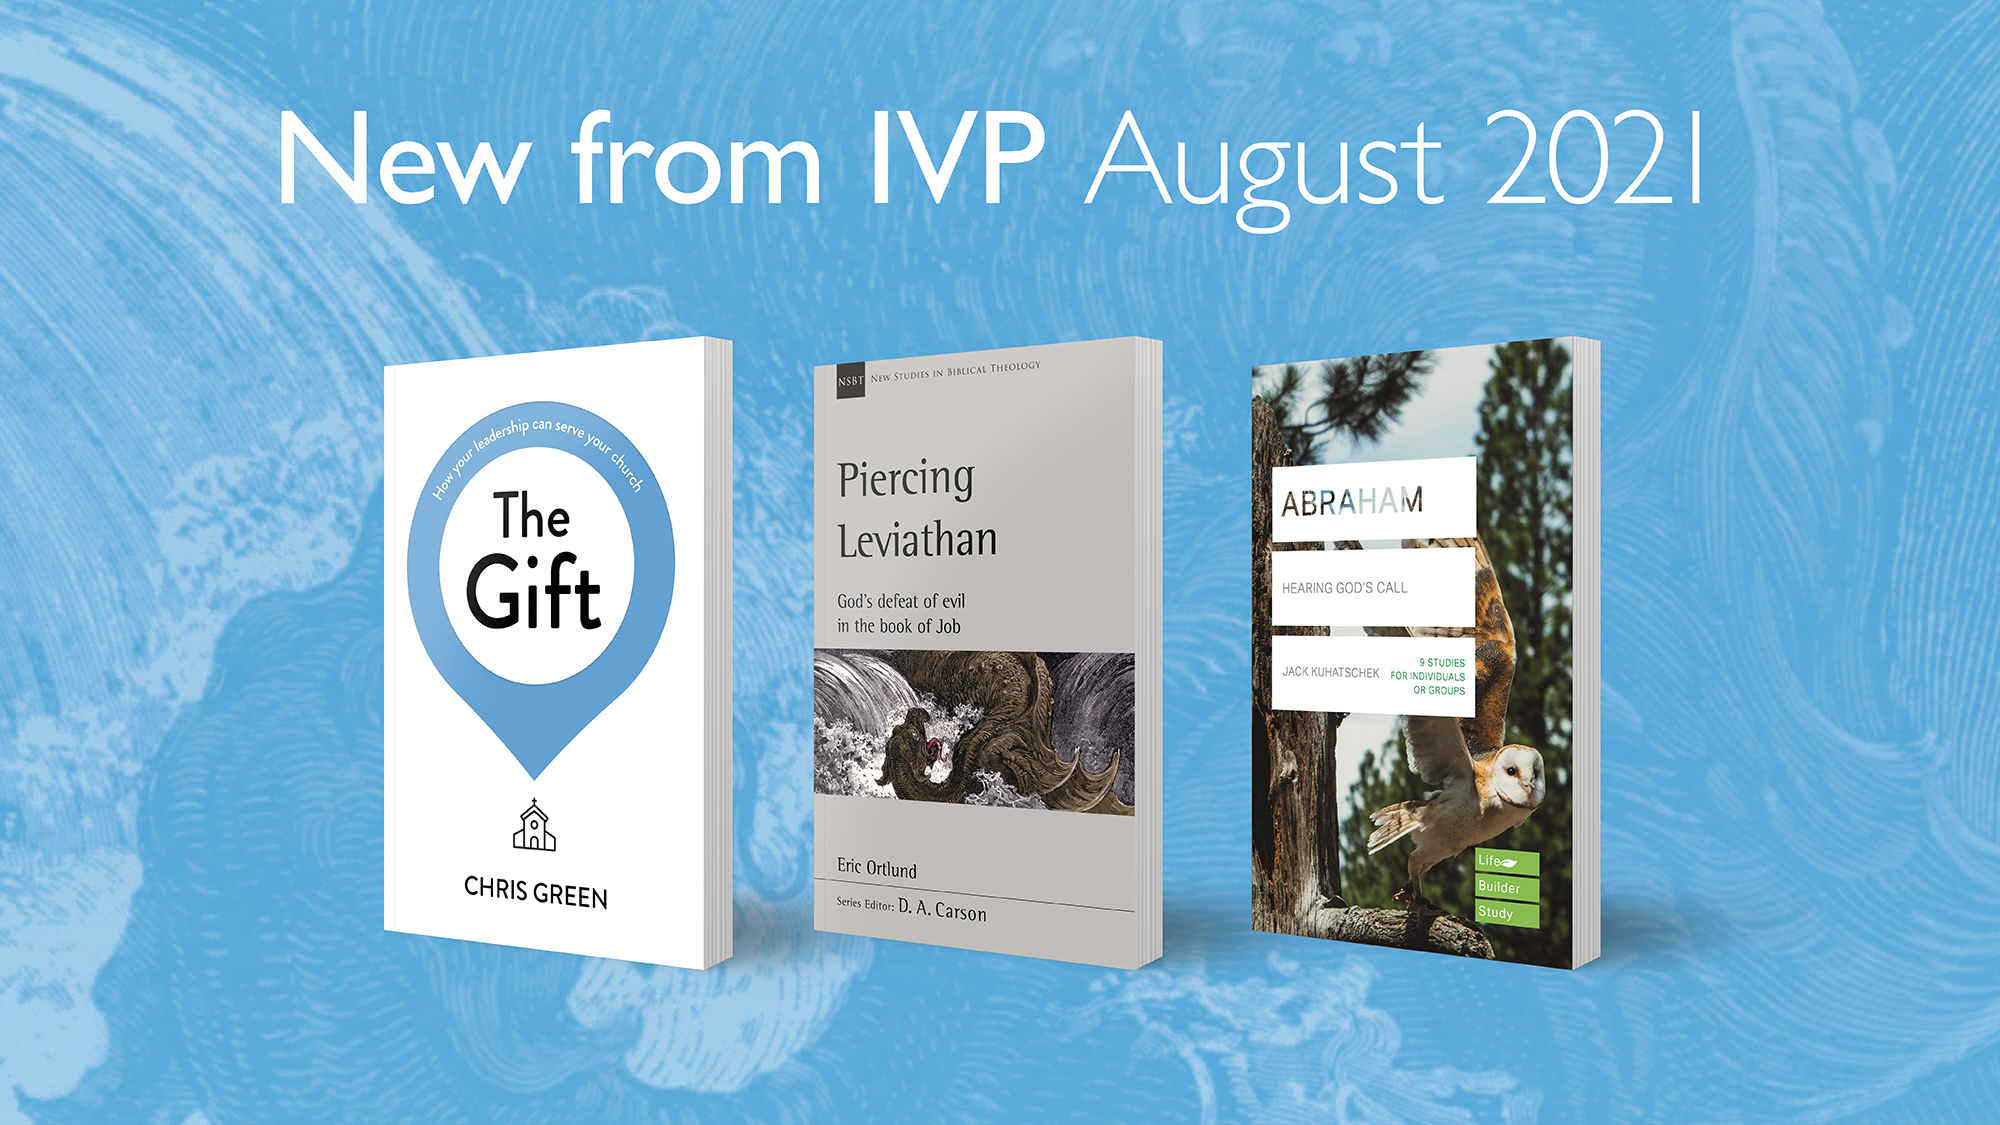 The IVP August 2021 Releases